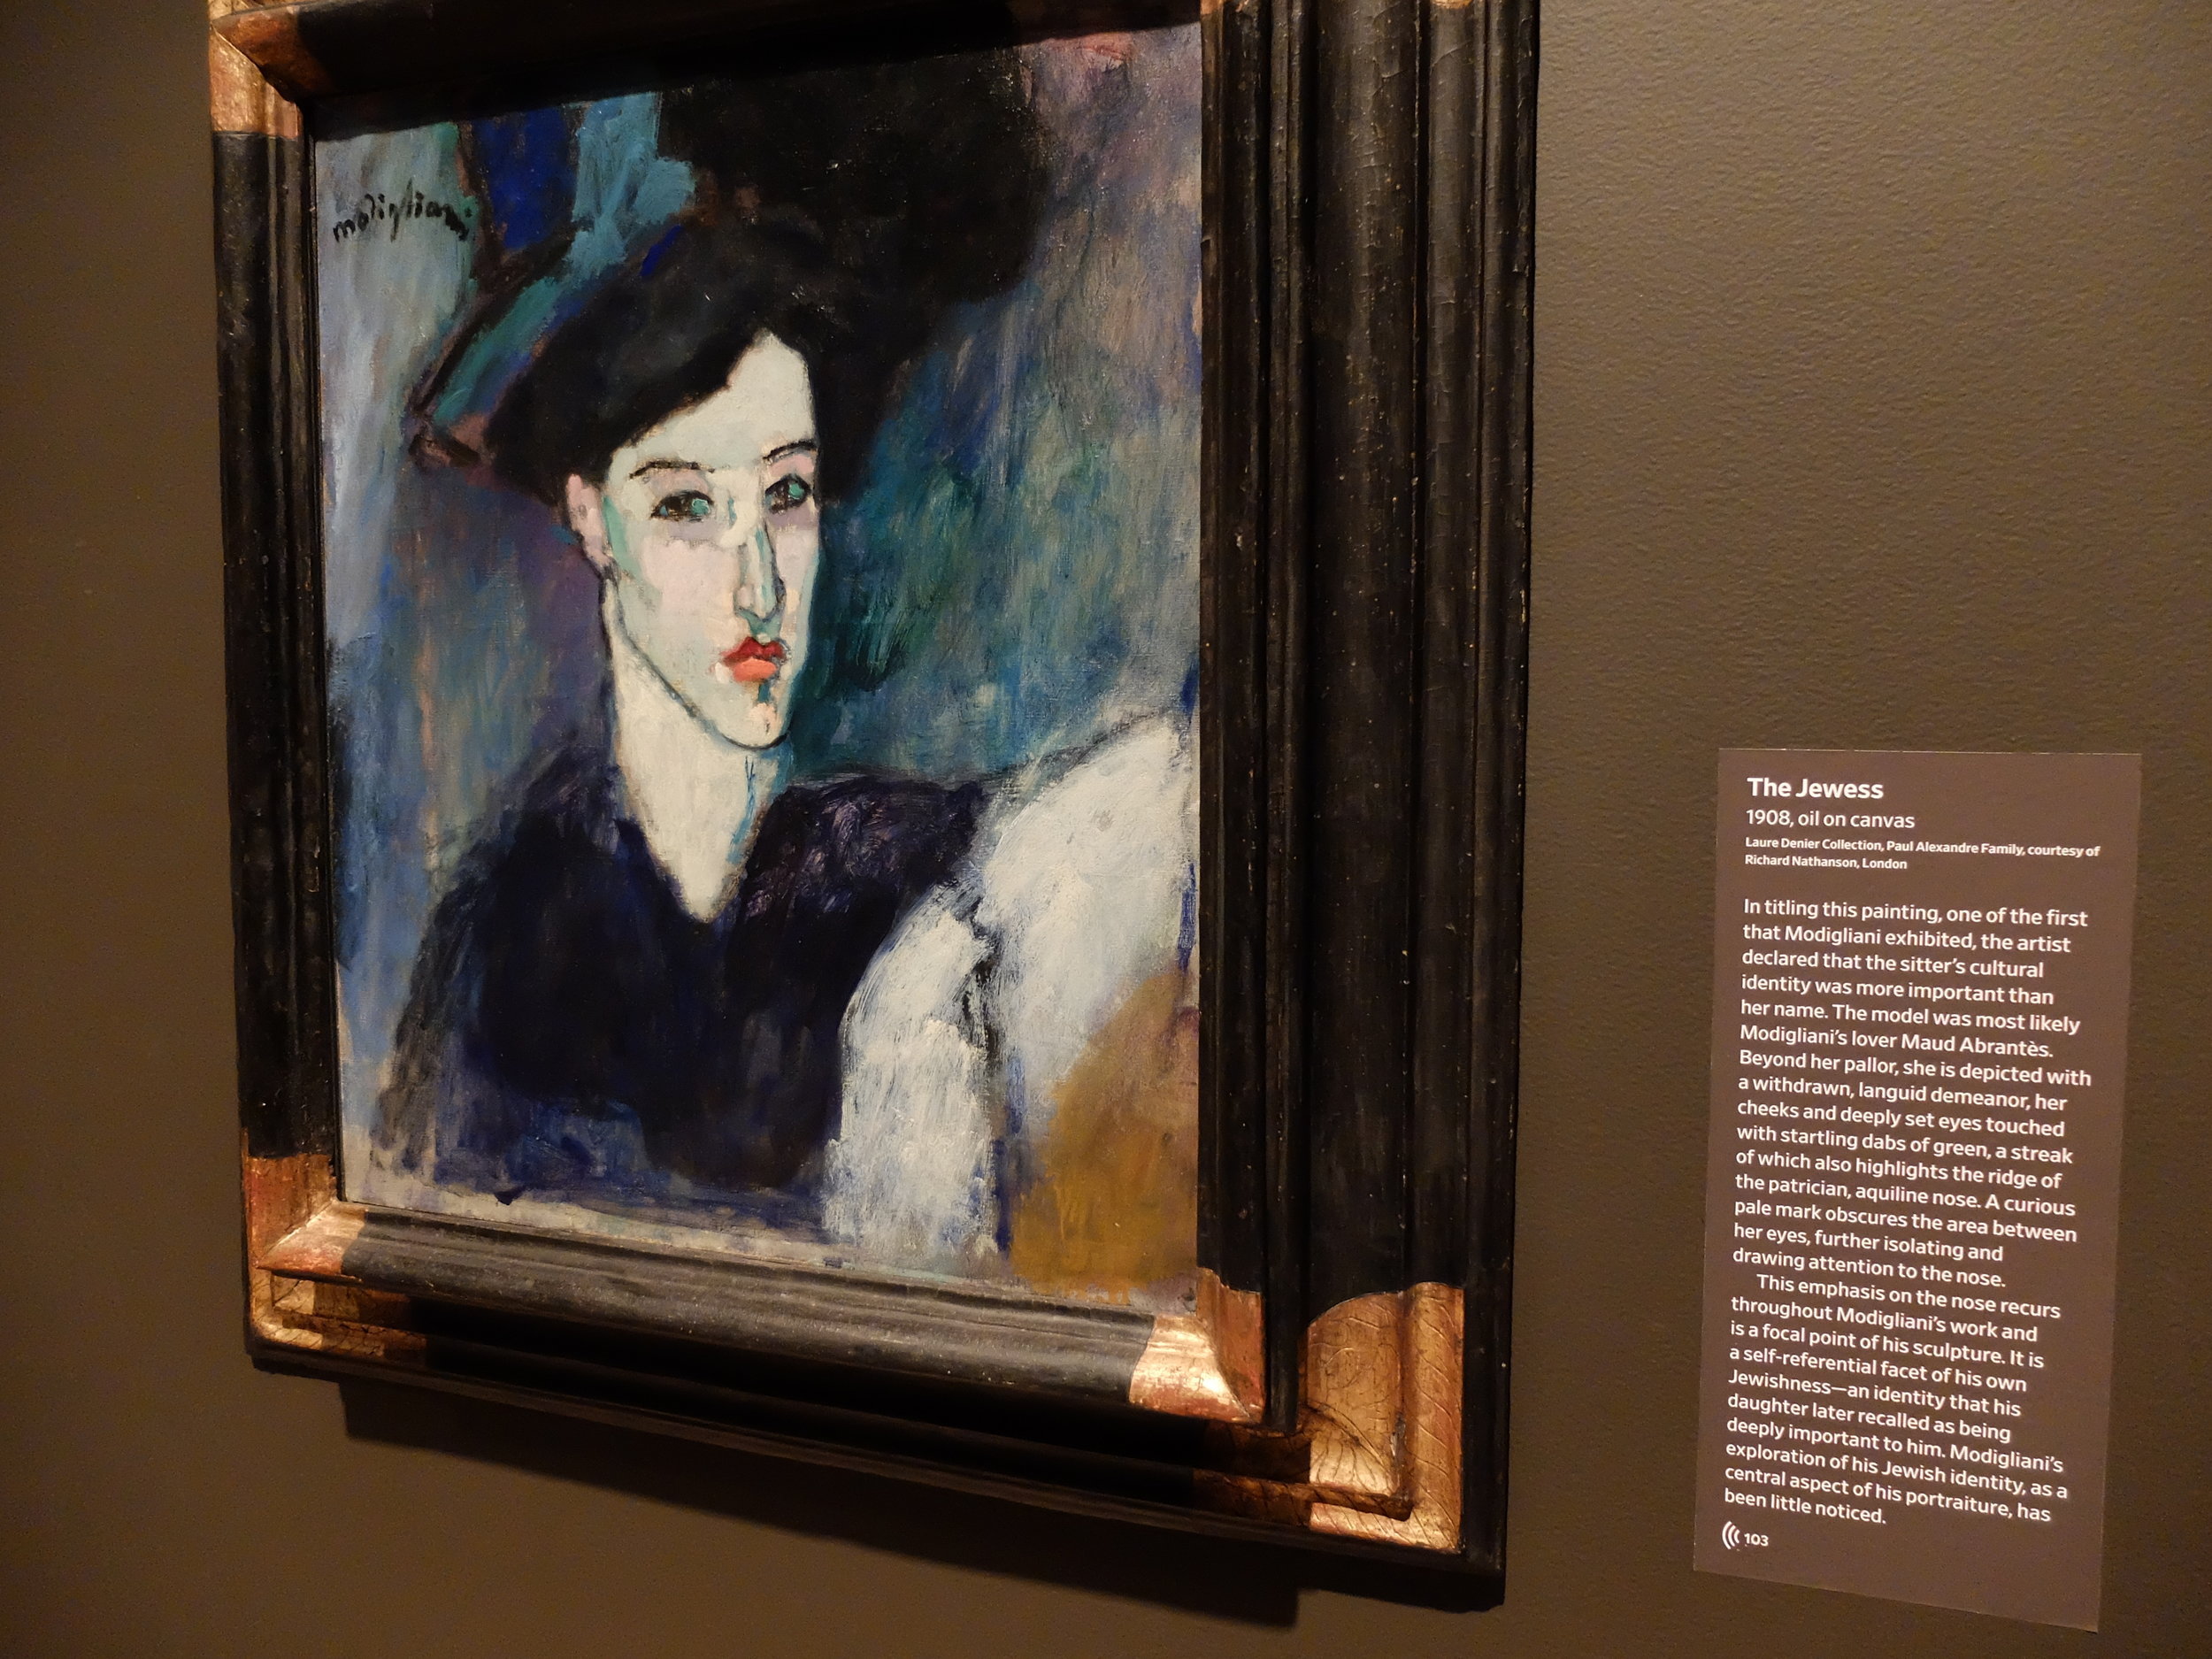 "An Italian Jew with a French mother, he introduced himself: 'My name is Modigliani. I am Jewish.'  As a form of protest, he refused to assimilate."